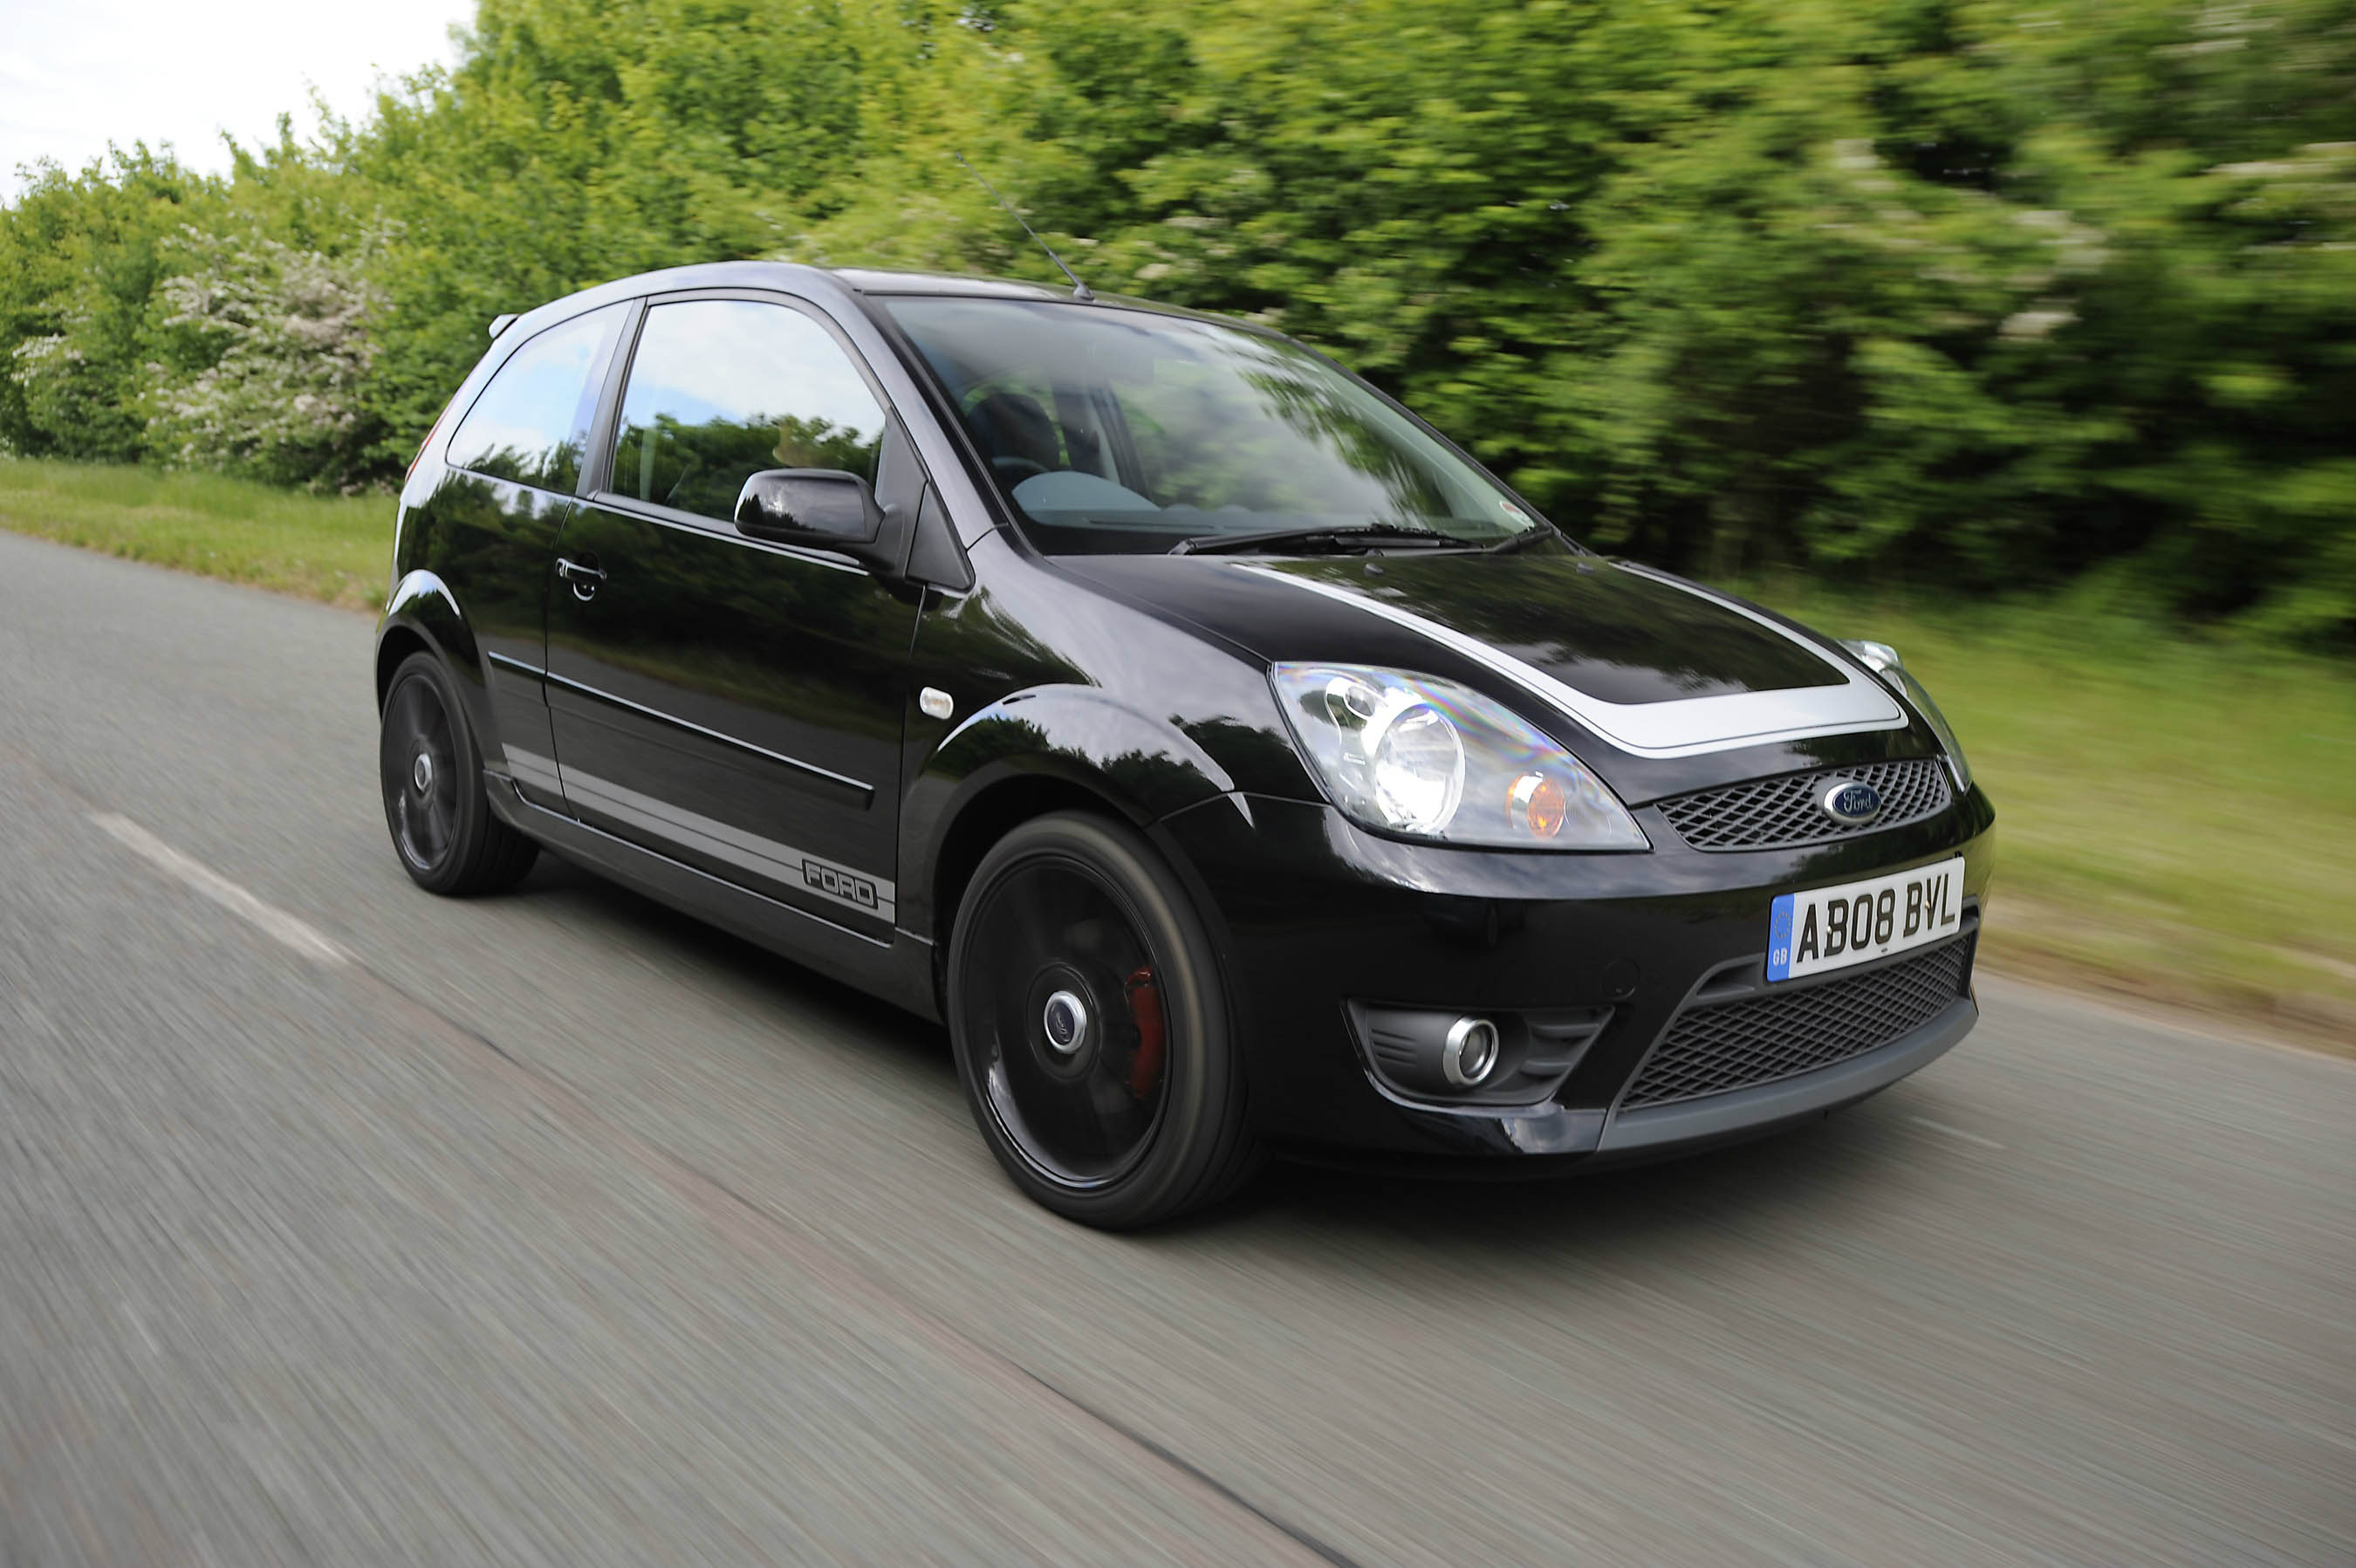 Buying guide: fantastically fun £6000 used cars, including the Ford Fiesta ST